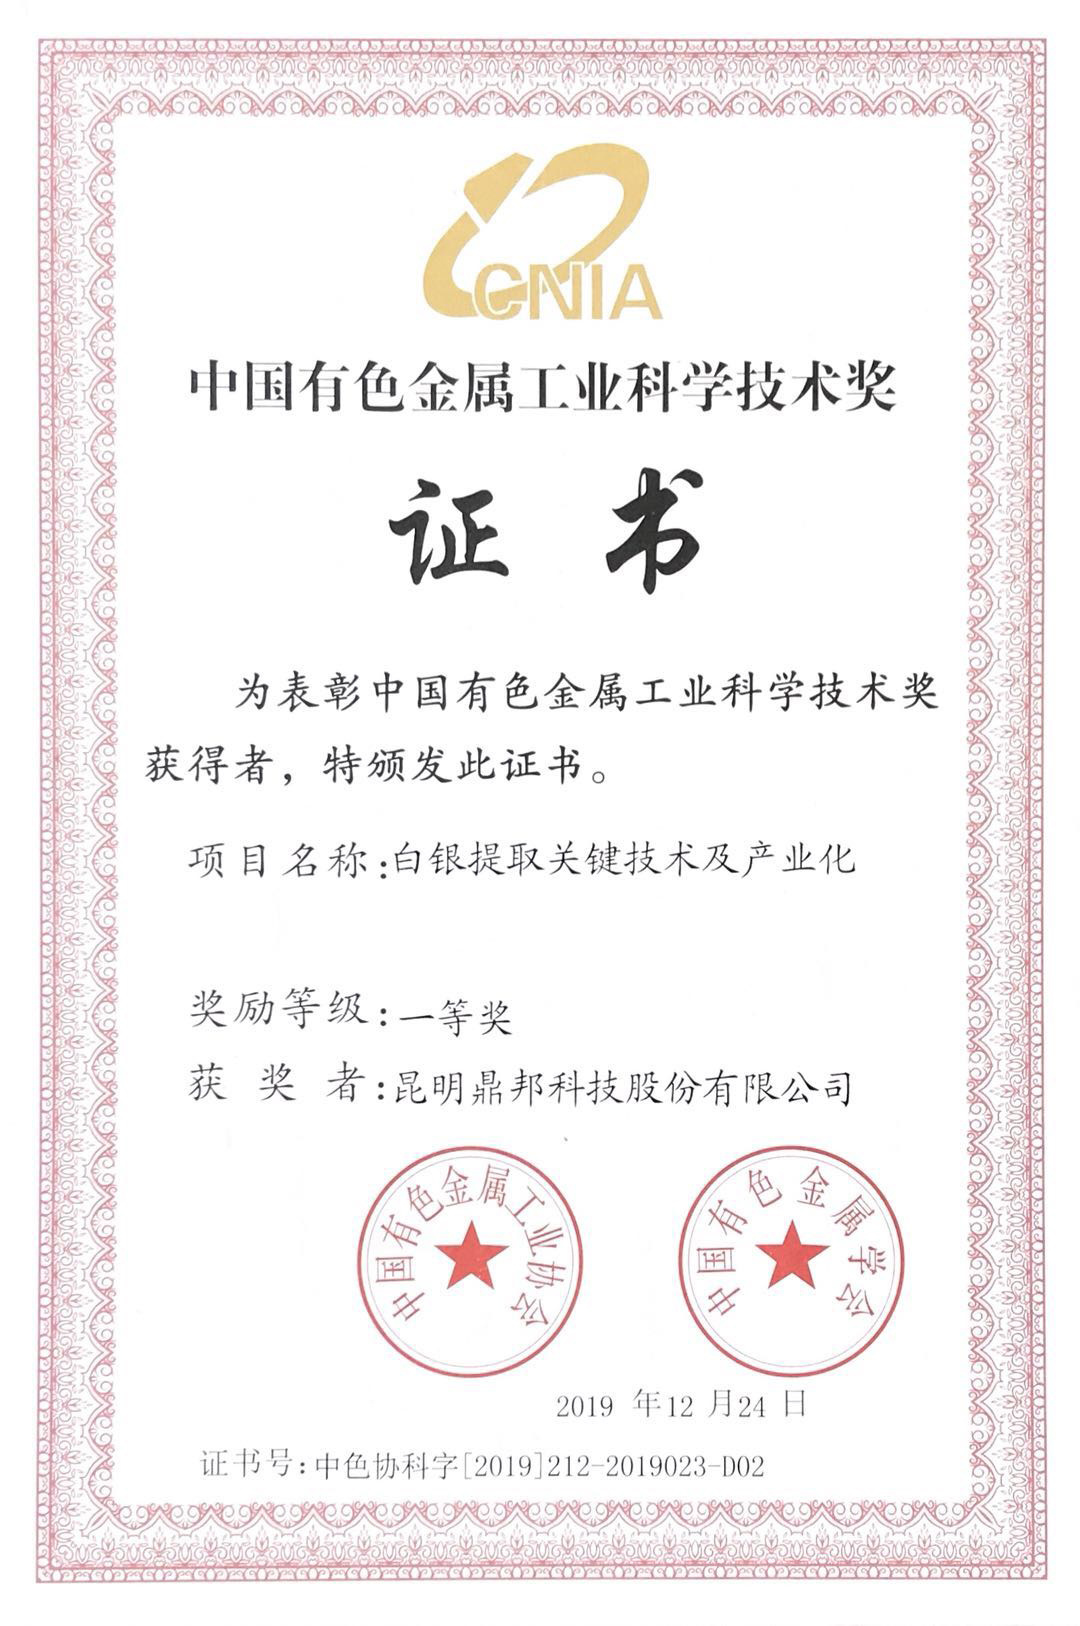 First Prize of Science and Technology in China's Nonferrous Metals Industry - Key Technology and Industrialization of Silver Extraction